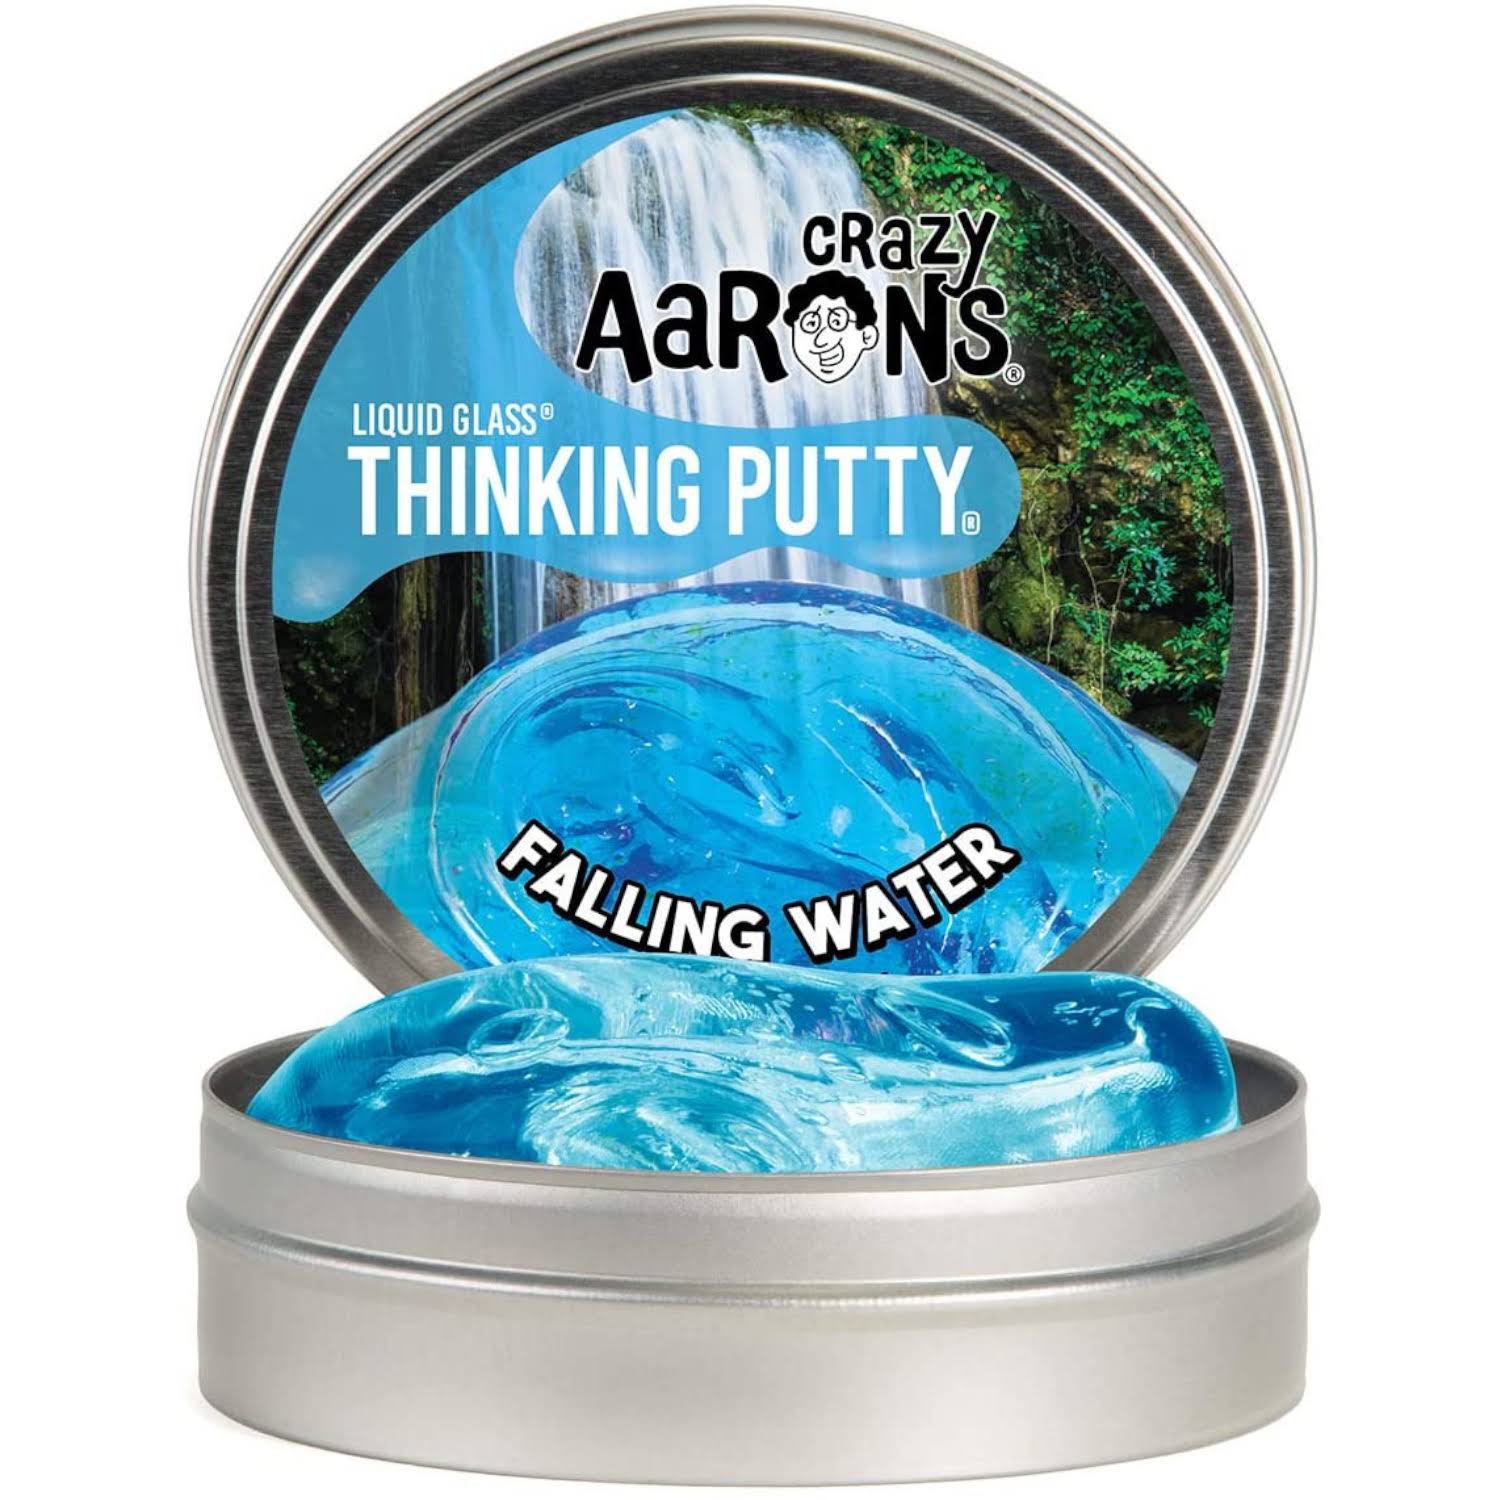 Crazy Aaron's Thinking Putty 4" Tin - Falling Water - Liquid Glass